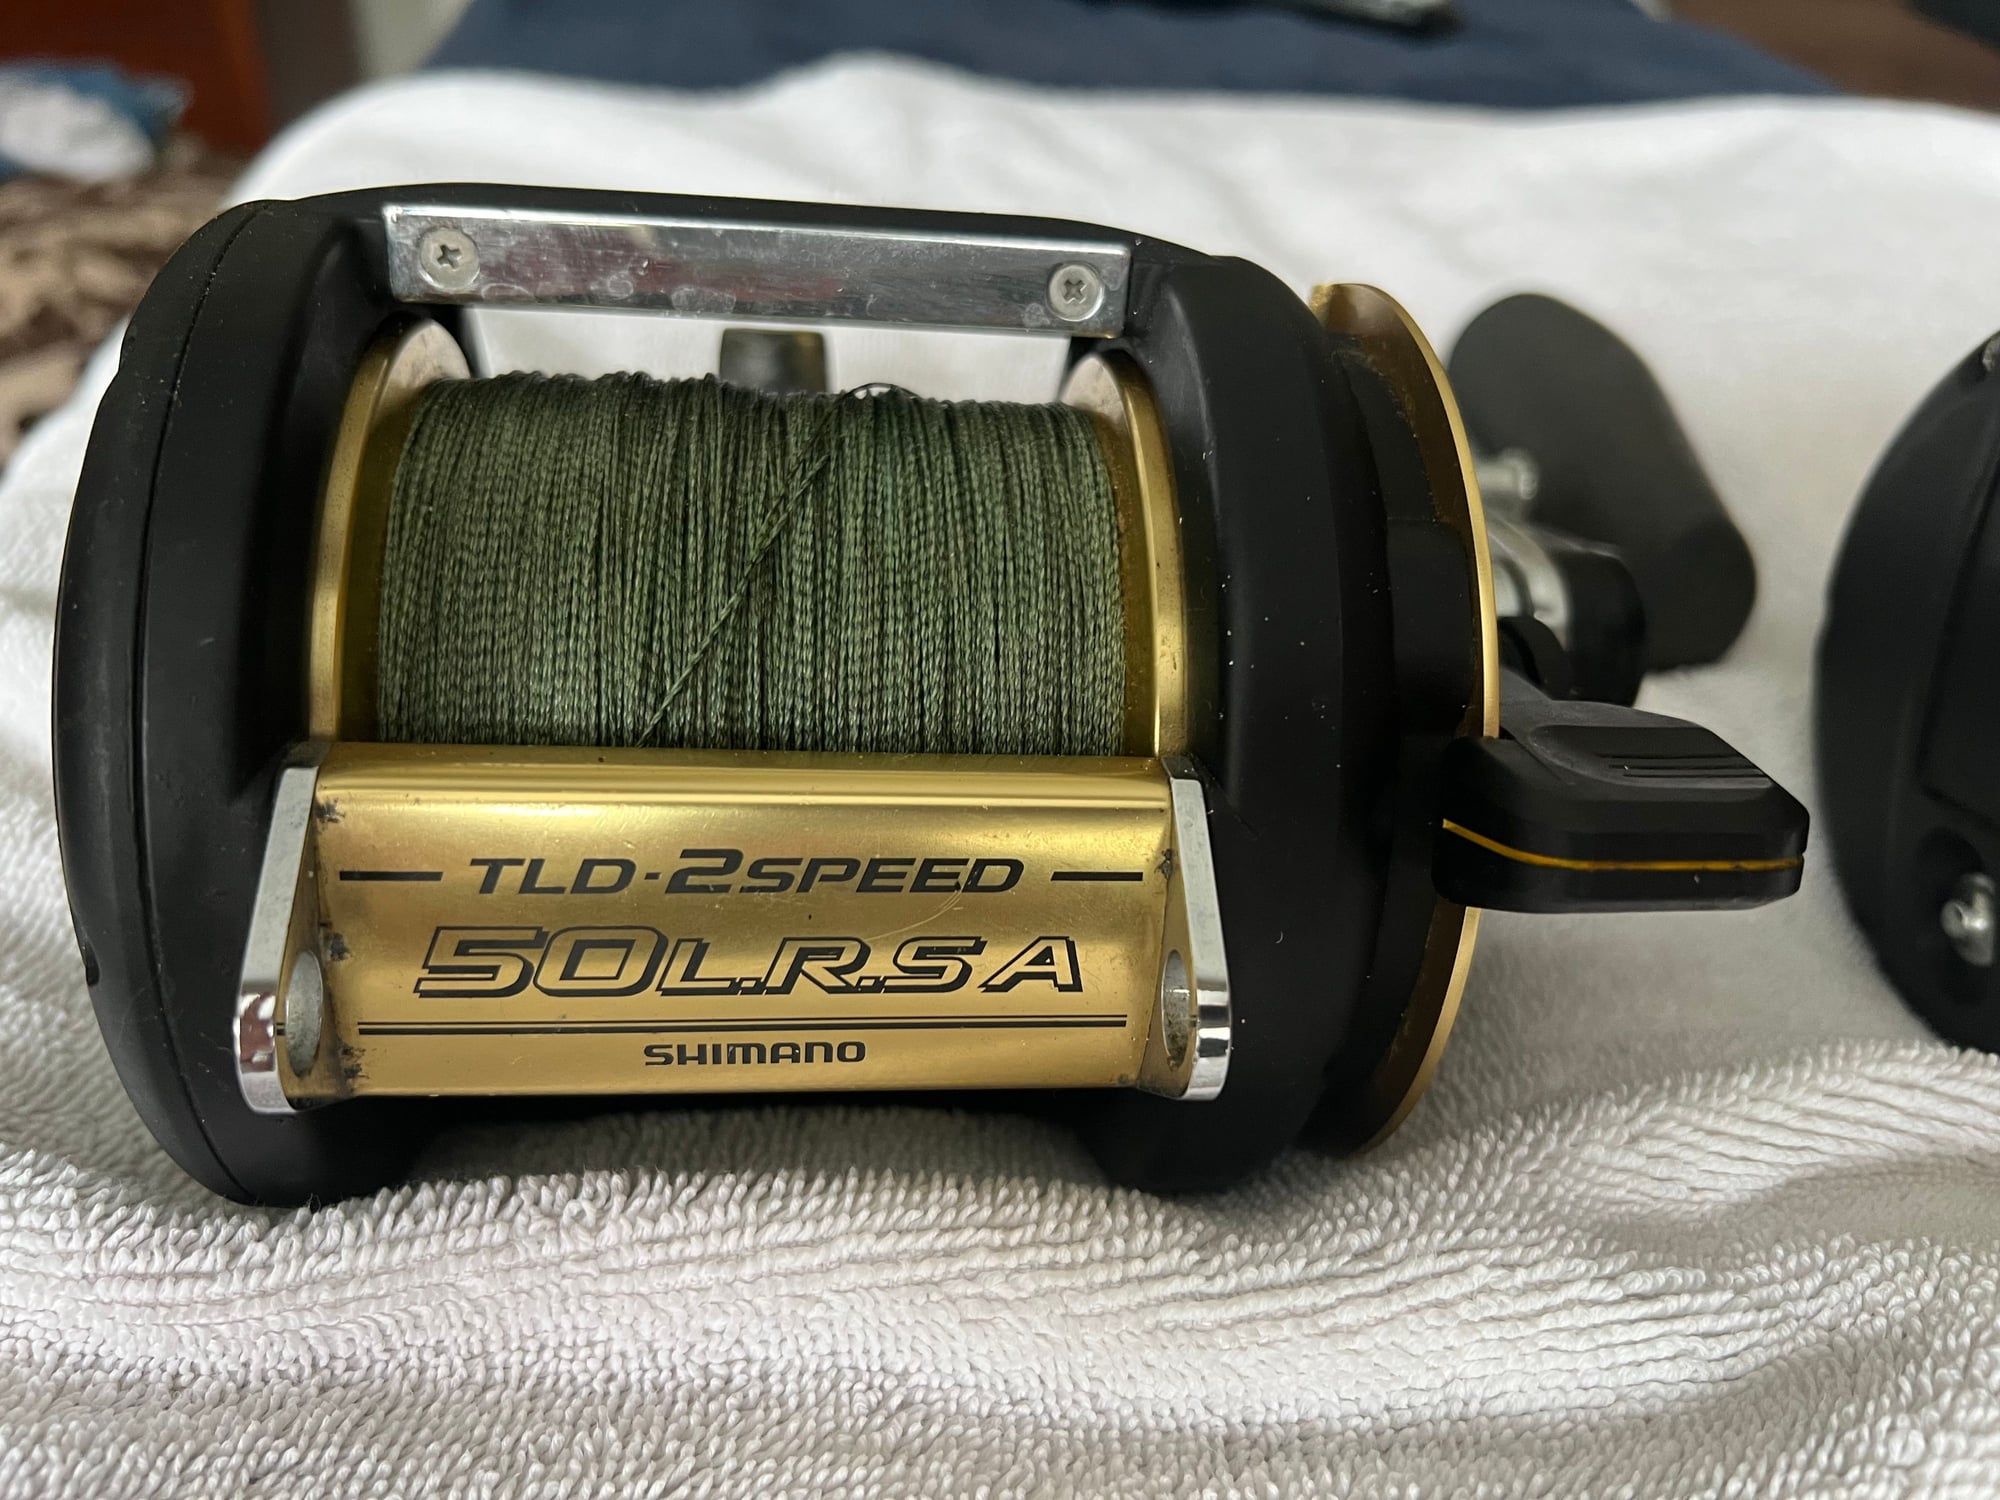 Pair of TLD 50LRSAs with matching reel covers - The Hull Truth